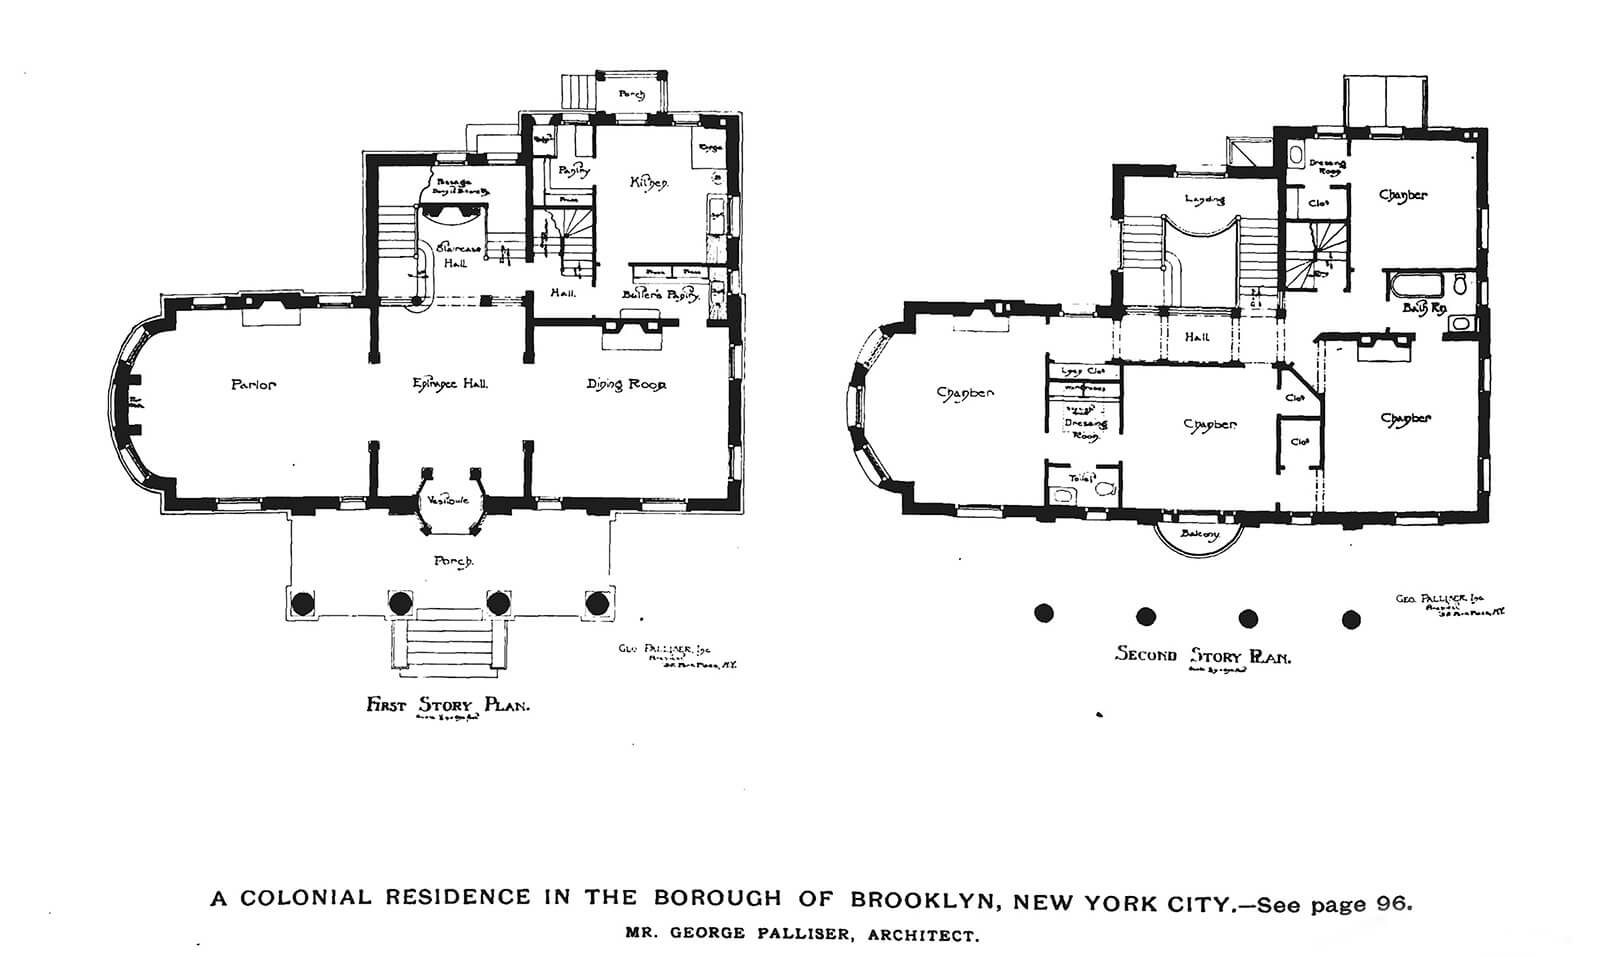 Floor plans for the Thomas Brush house via Scientific American, Building Edition